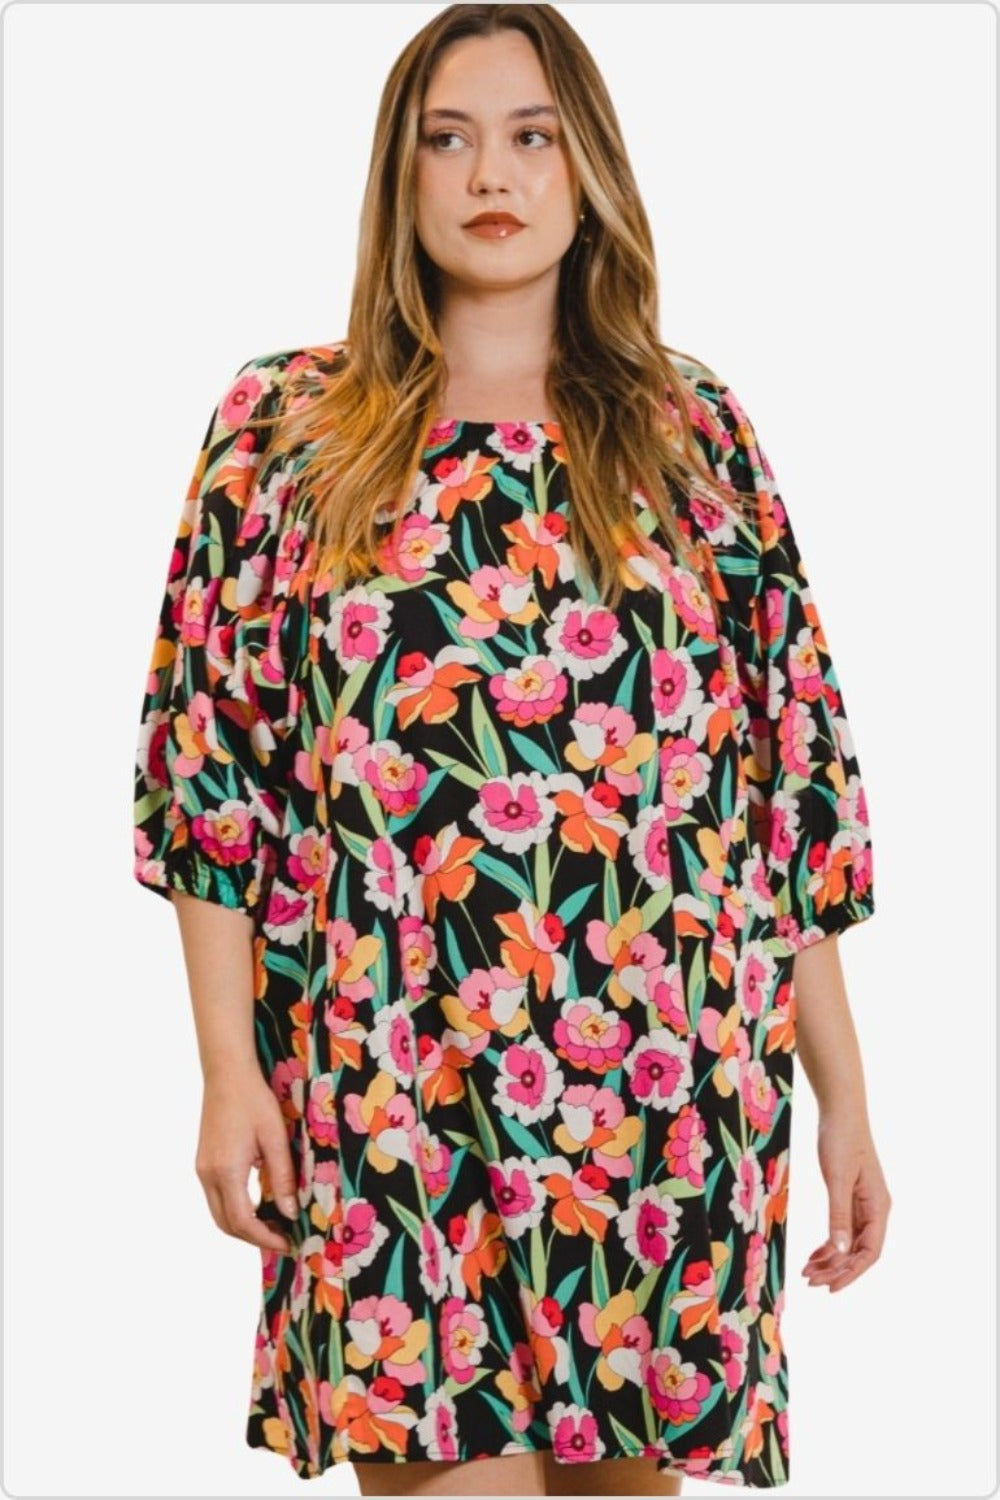 Fashionable plus-size model in a floral puff sleeve mini dress with vibrant spring pattern.